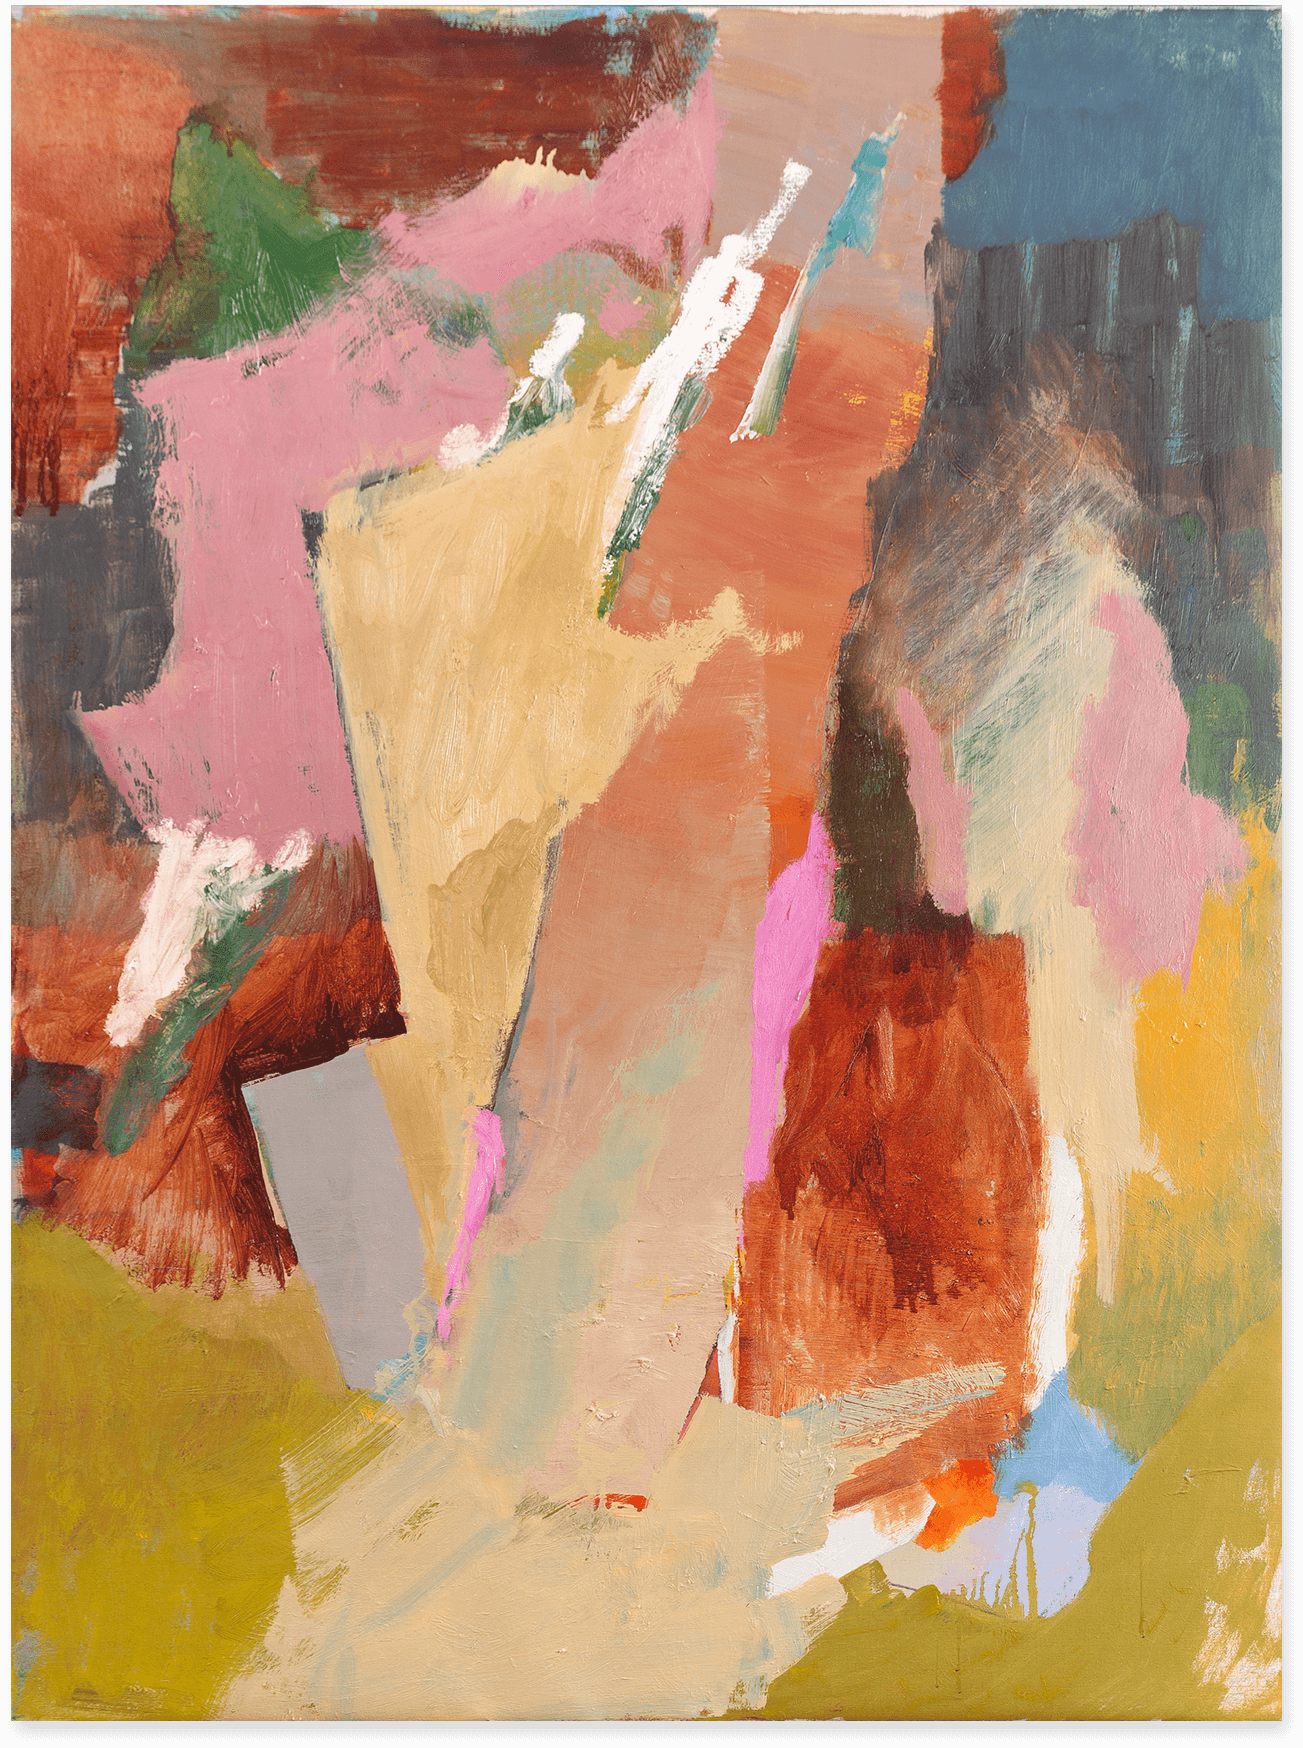 An abstract oil painting in earth tones, pink and white